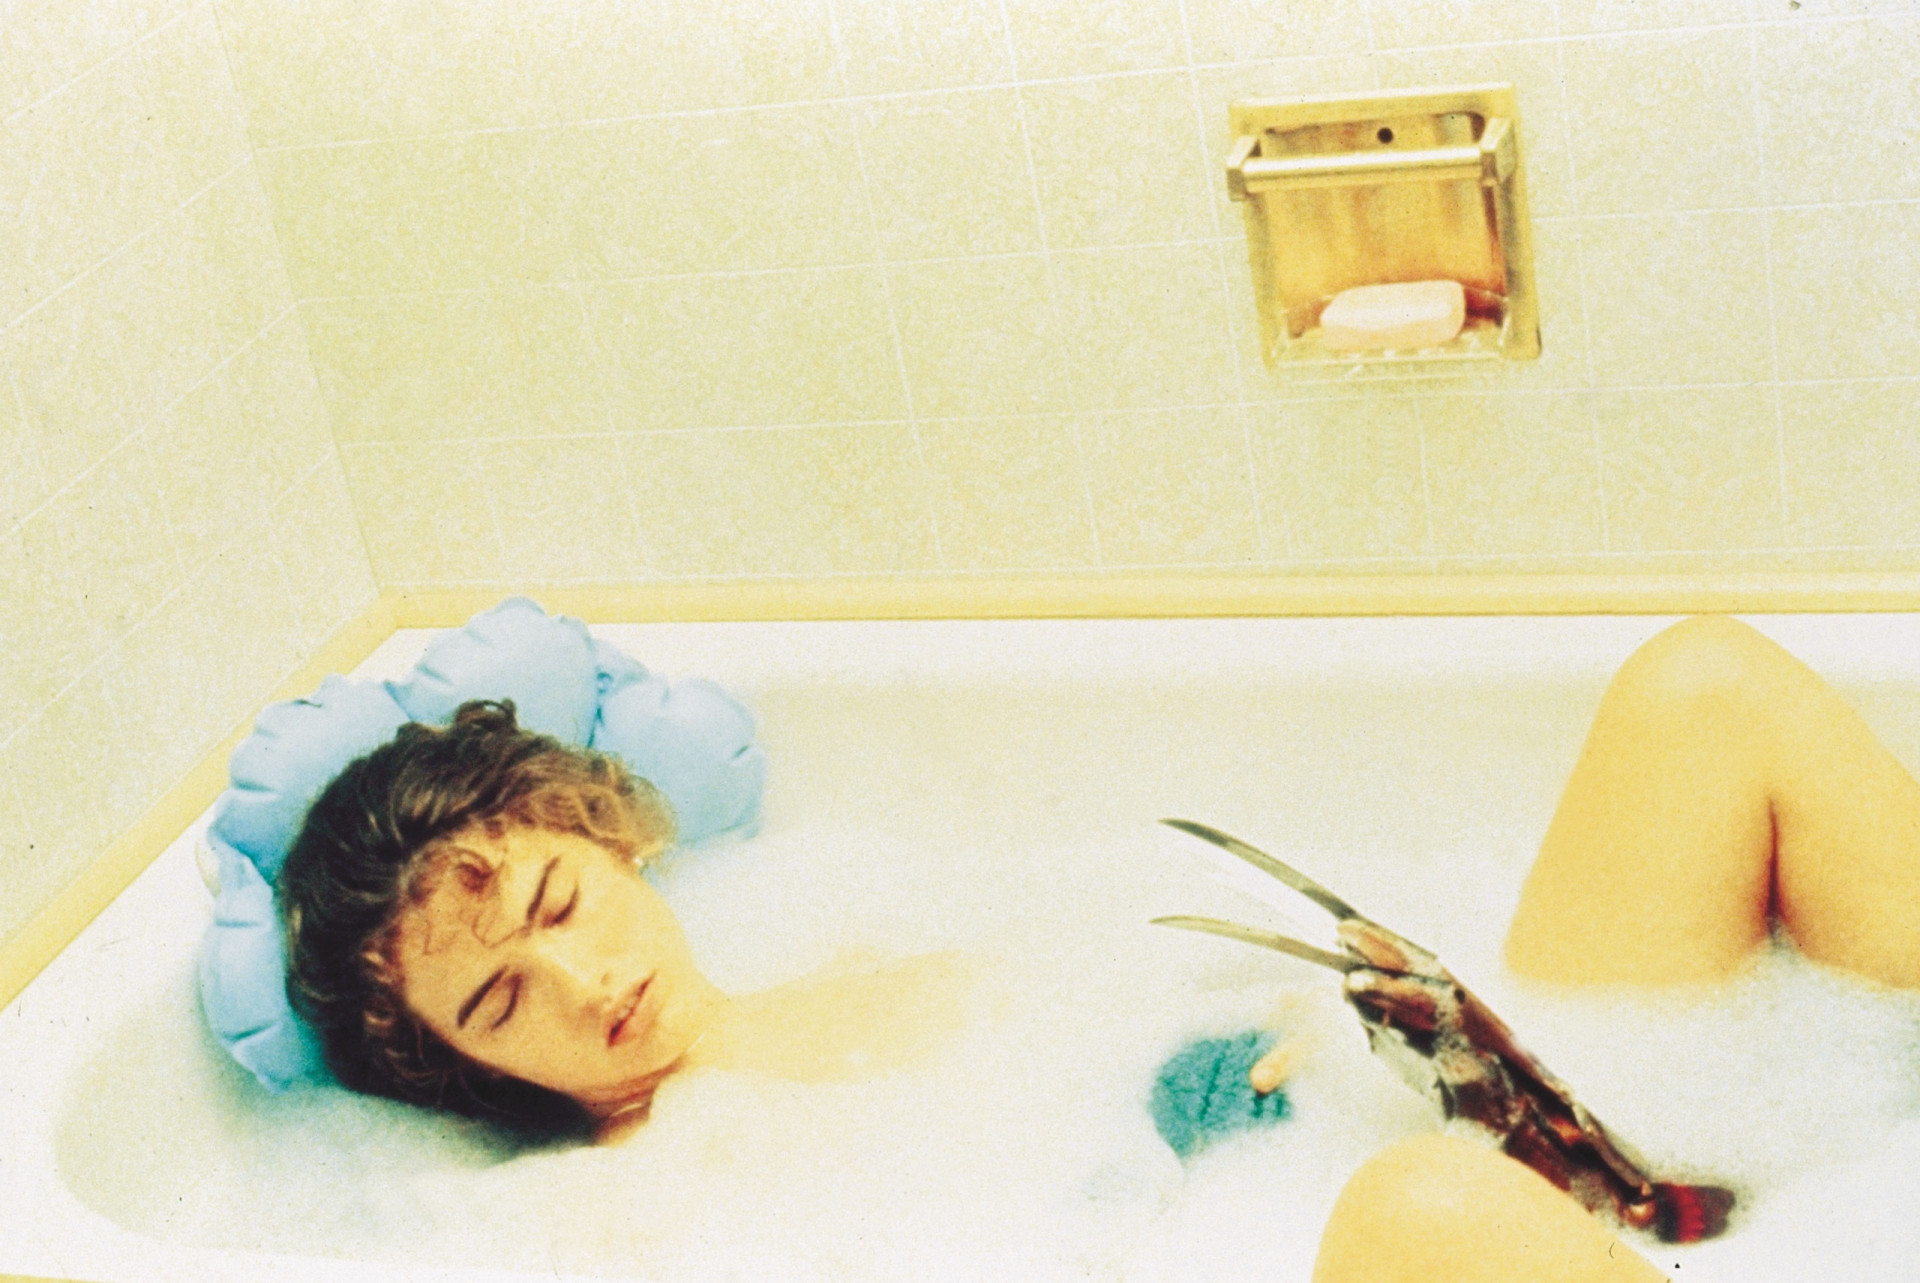 <p>In one oof cinema's scariest bathtub scenes, Nancy (Heather Langenkamp) is slumbering during a long, hot soak, when the terrifying gloved hand we all know and fear rises out the bubbles in an attempt to grab her.</p><p>You may also like:<a href="https://www.starsinsider.com/n/220053?utm_source=msn.com&utm_medium=display&utm_campaign=referral_description&utm_content=546036en-en"> Unprofessional stars involved in spats at work</a></p>